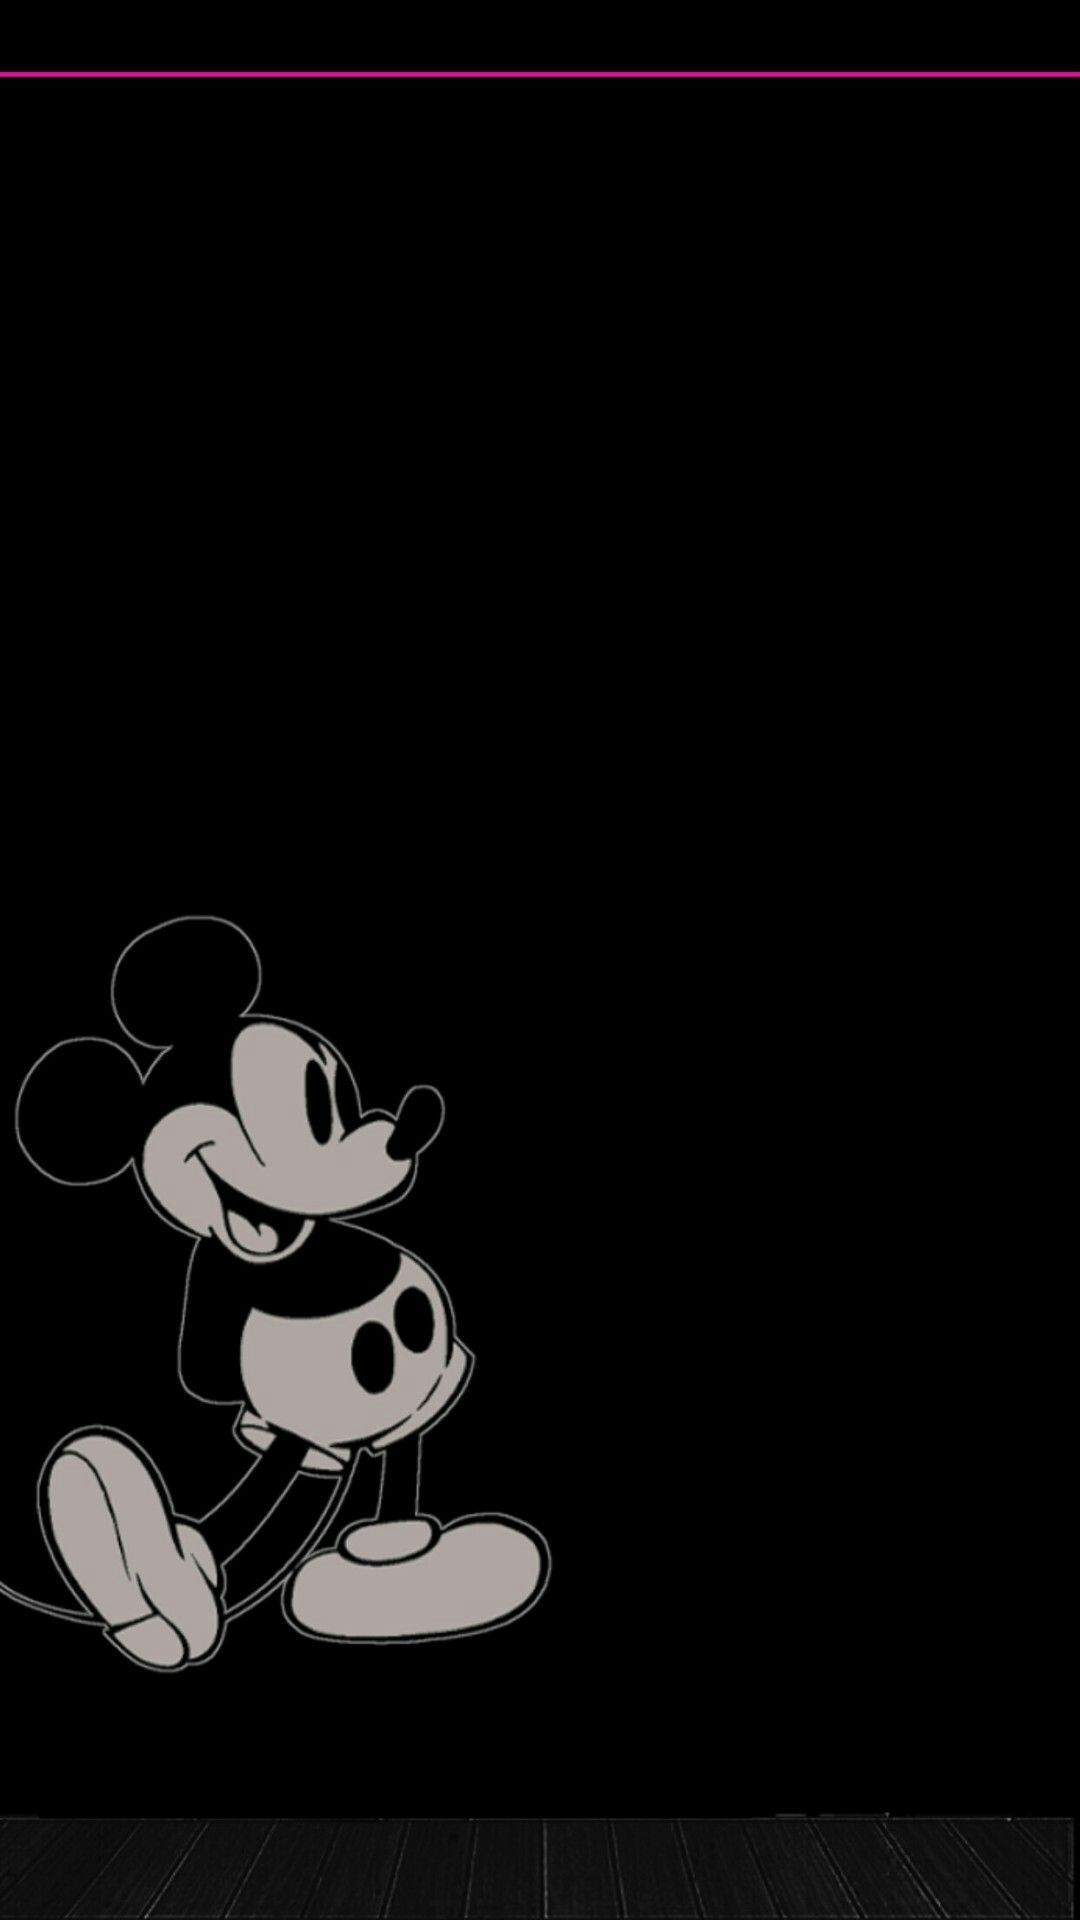 HD wallpaper Mickey And Minnie Mouse Love Couple Cartoon Red Wallpaper  With Hearts Hd Wallpaper For Desktop Mobile And Tablet 38402400  Wallpaper  Flare